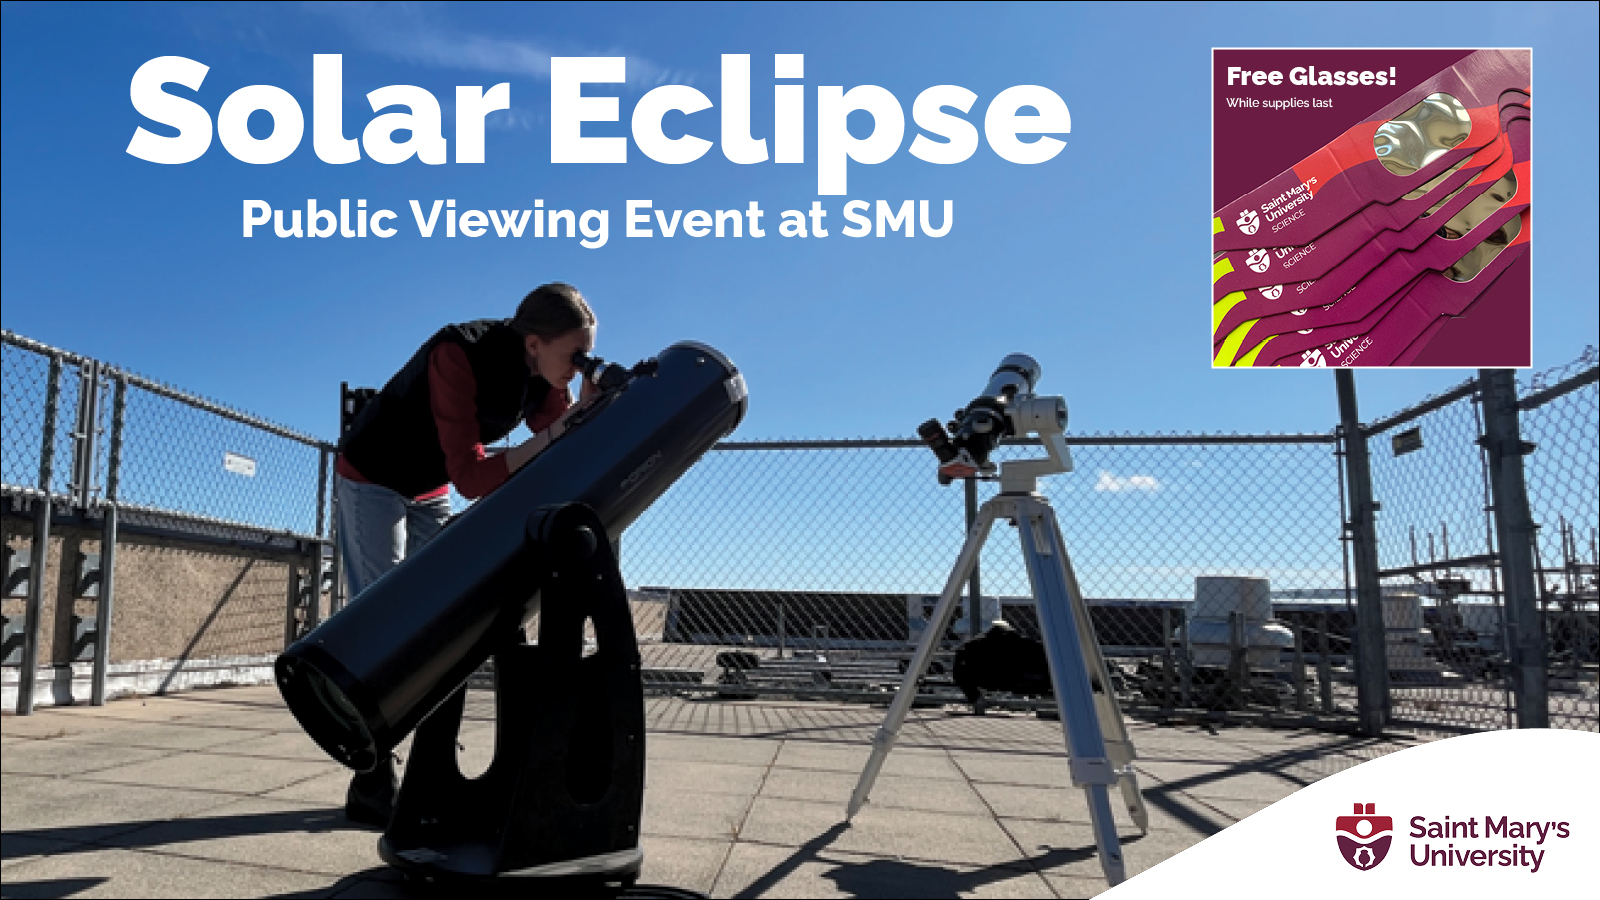 Photo flyer with text Solar Eclipse Public Viewing Event at SMU (with Free Glasses while supplies lsat)